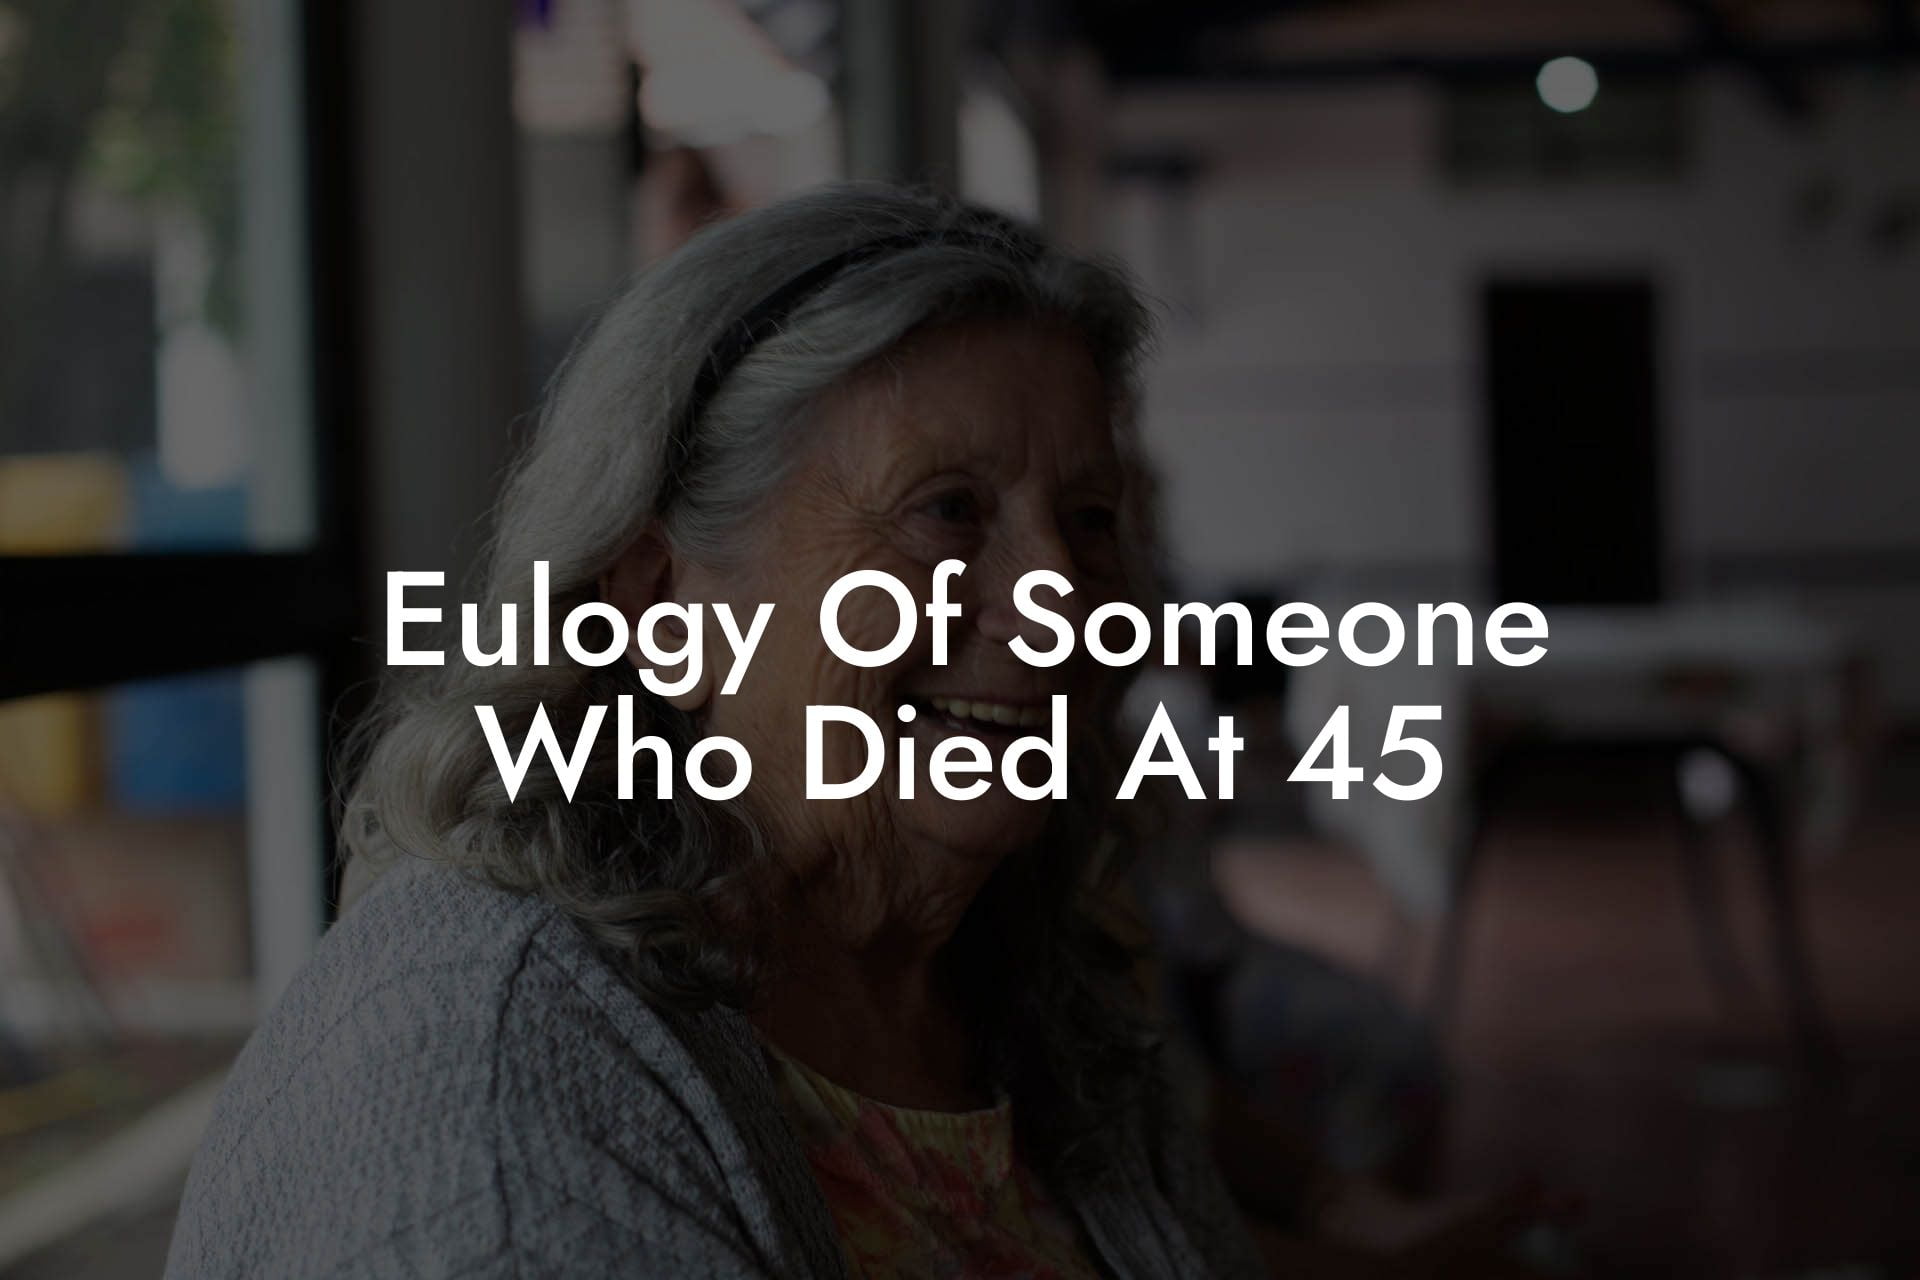 Eulogy Of Someone Who Died At 45